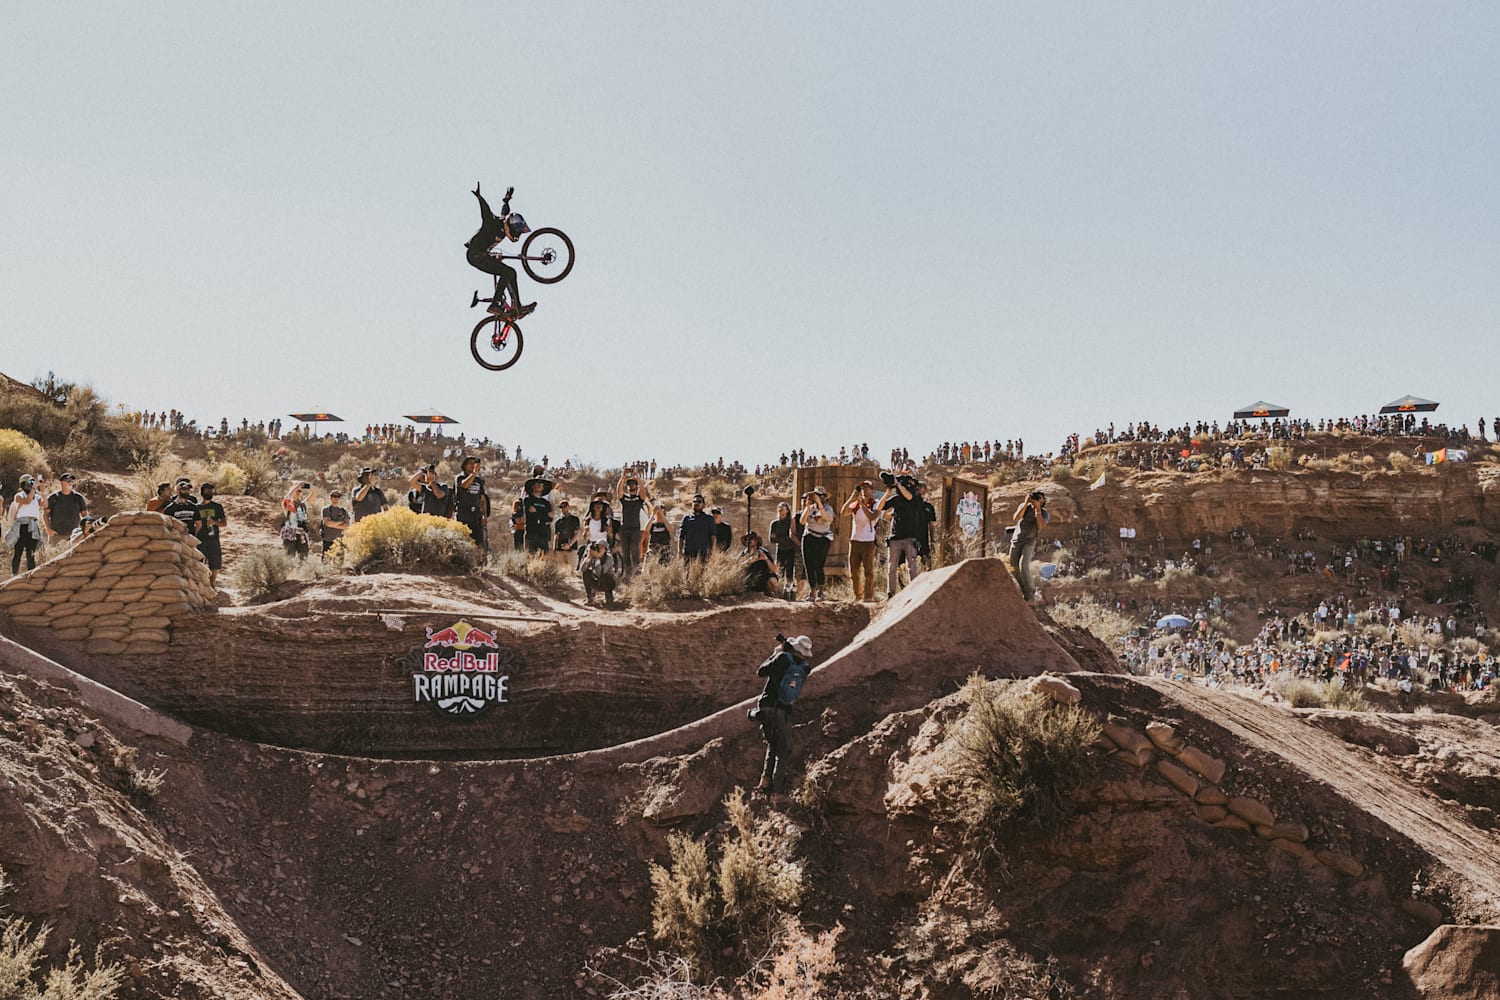 red bull rampage shop